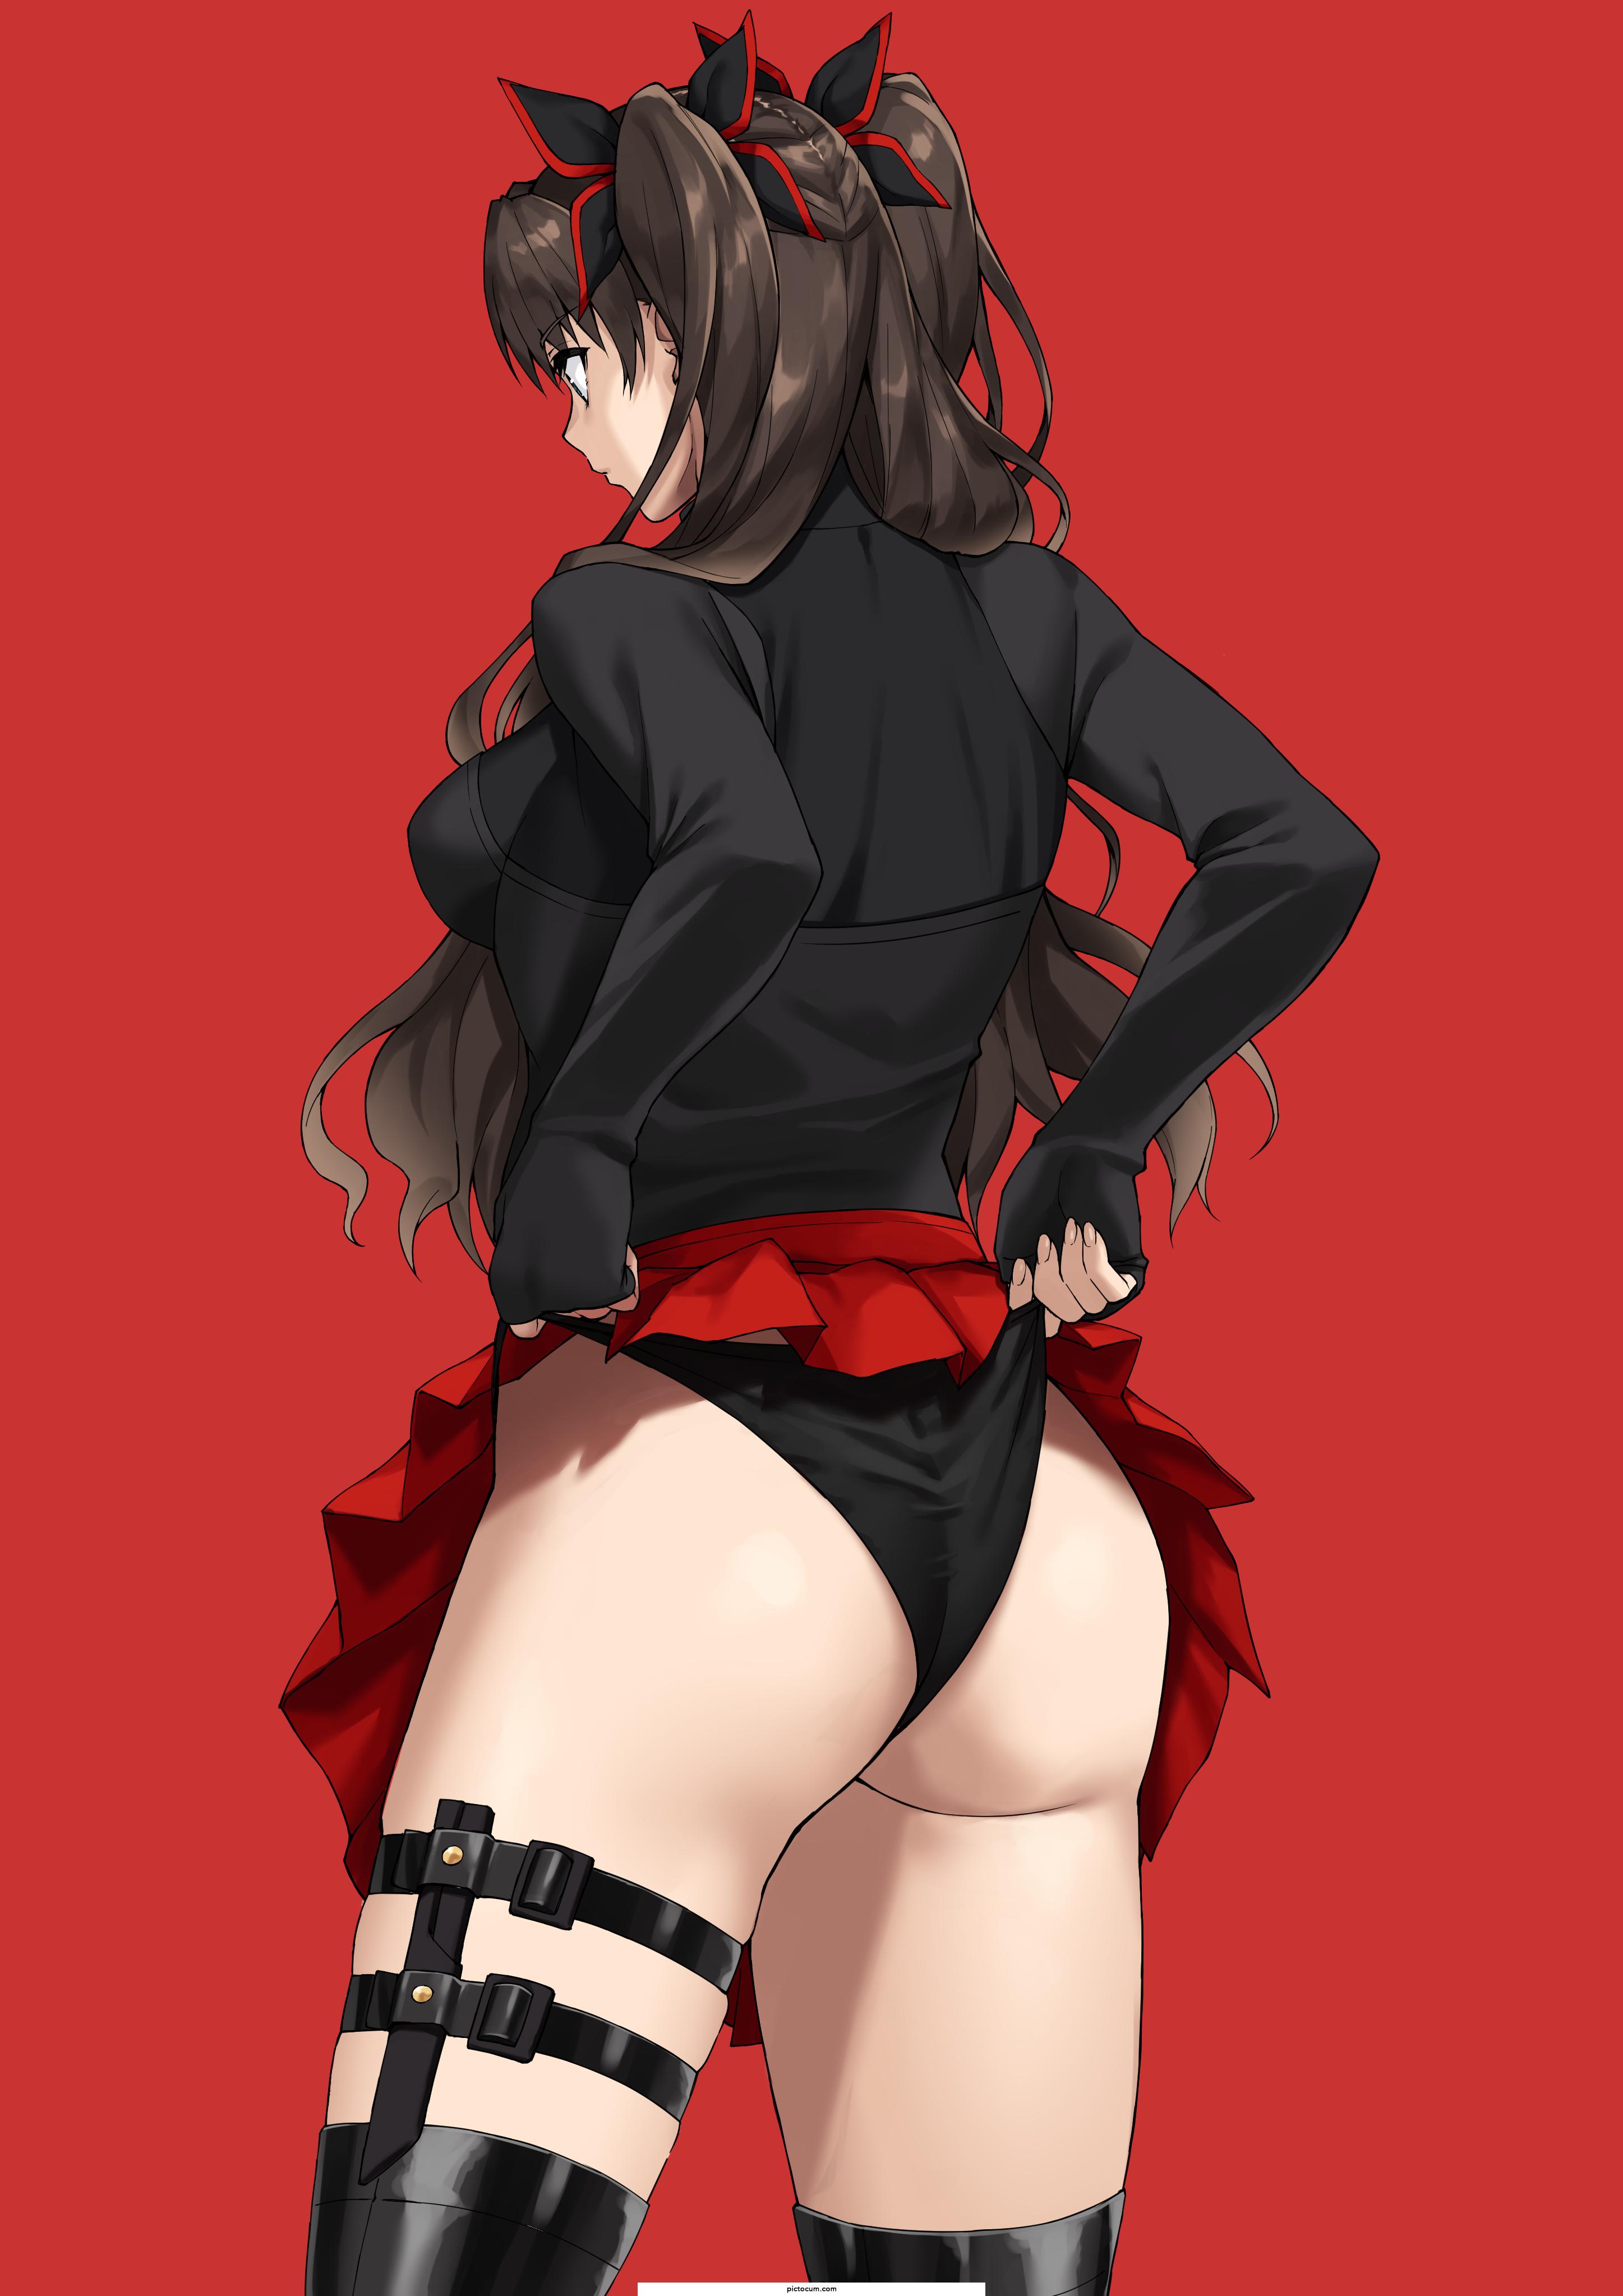 Rin's Thighs and Booty.